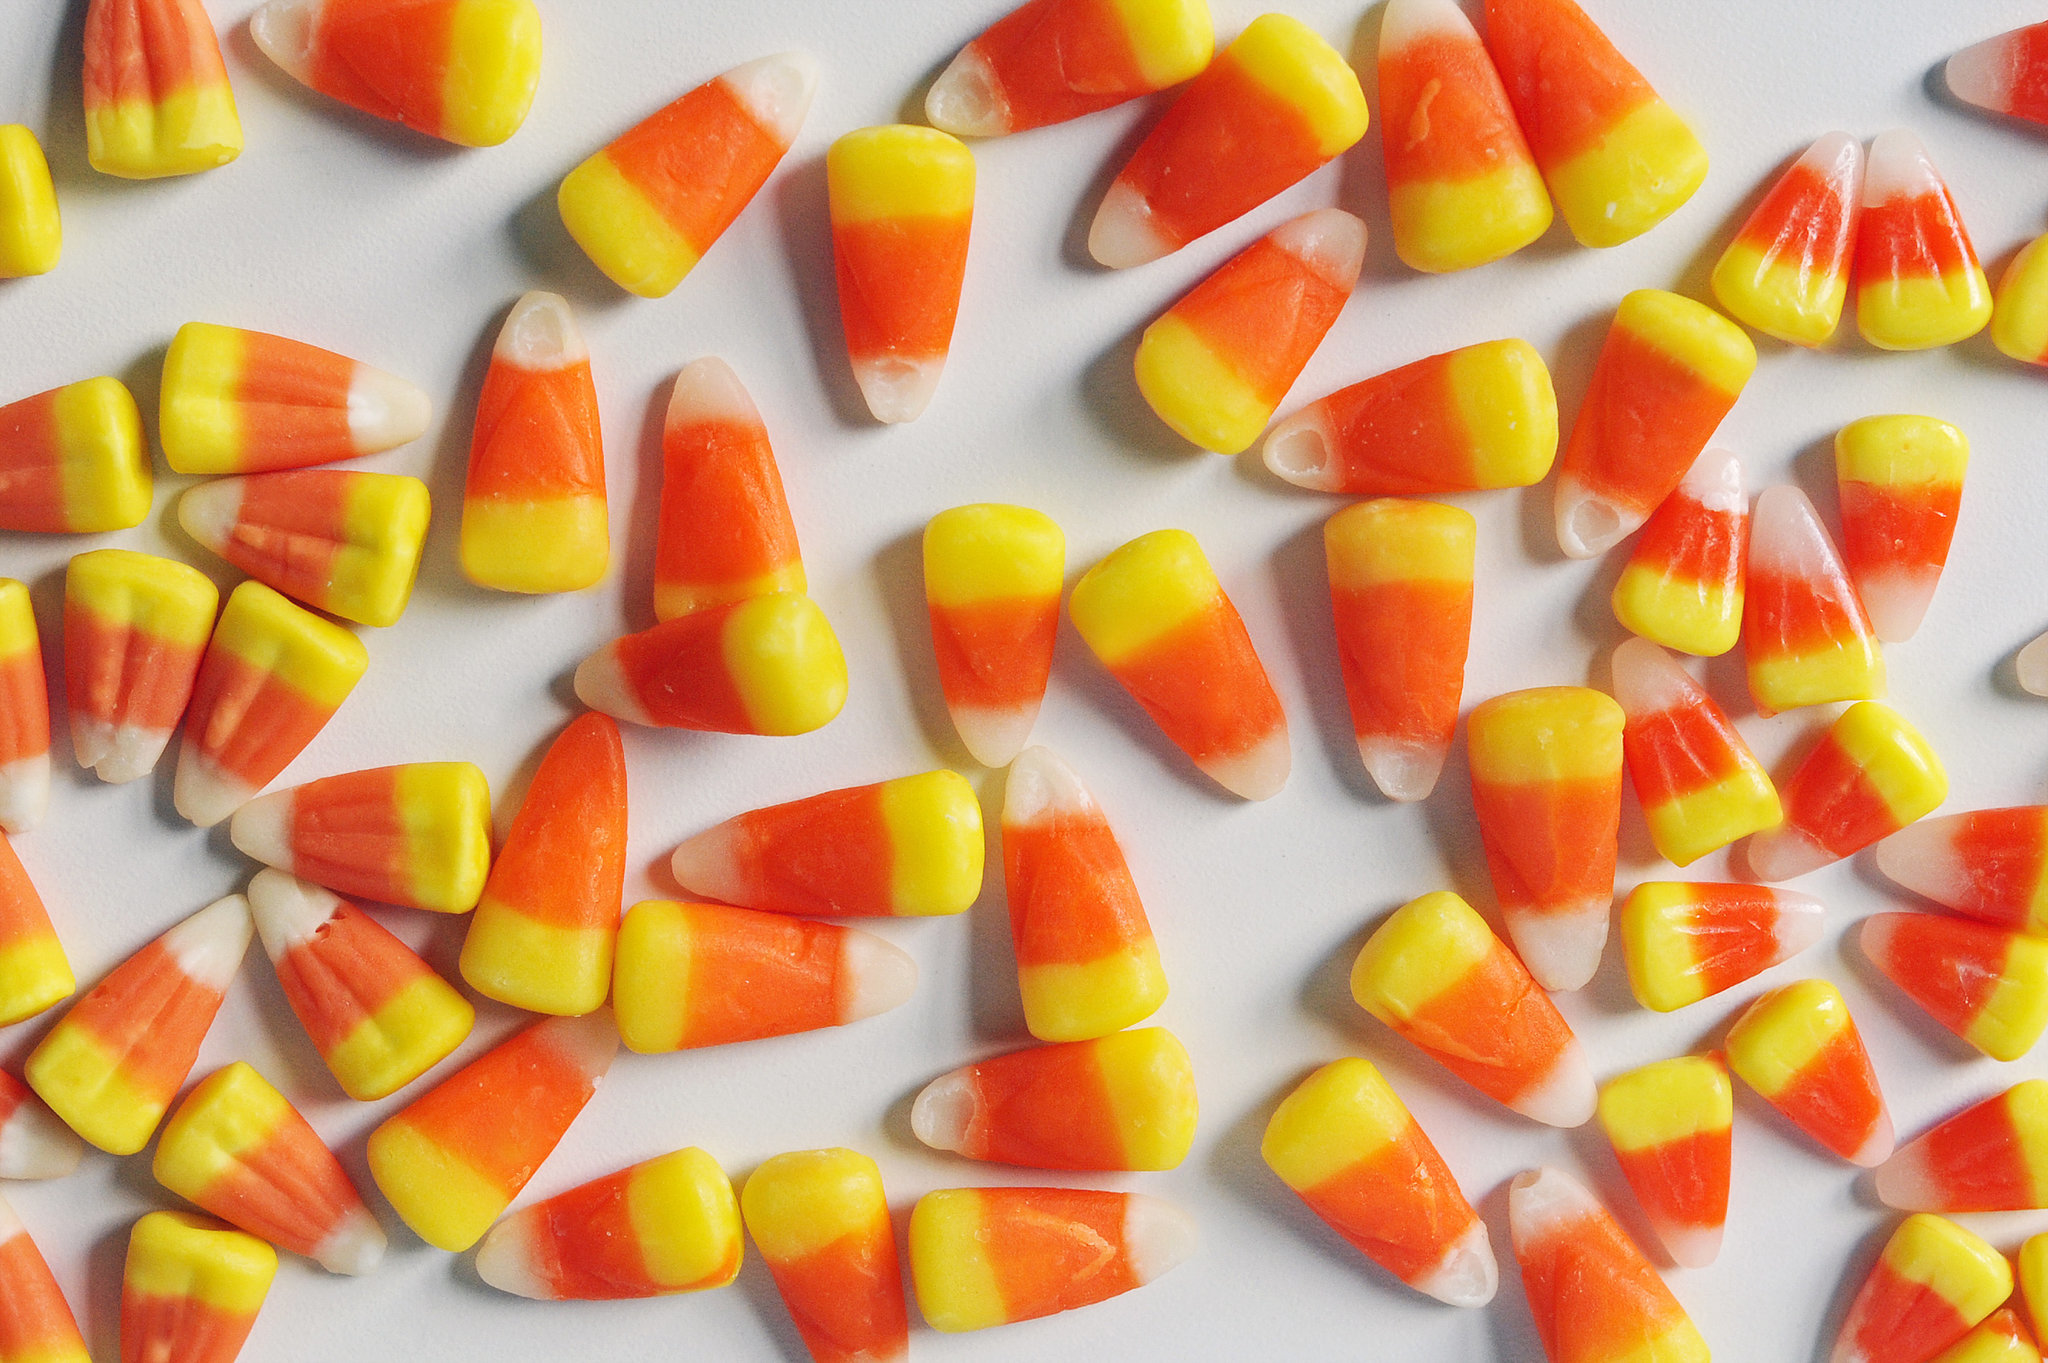 exactly what candy corn is? im thinking sugar coated kernels ofsweetcorn? g...